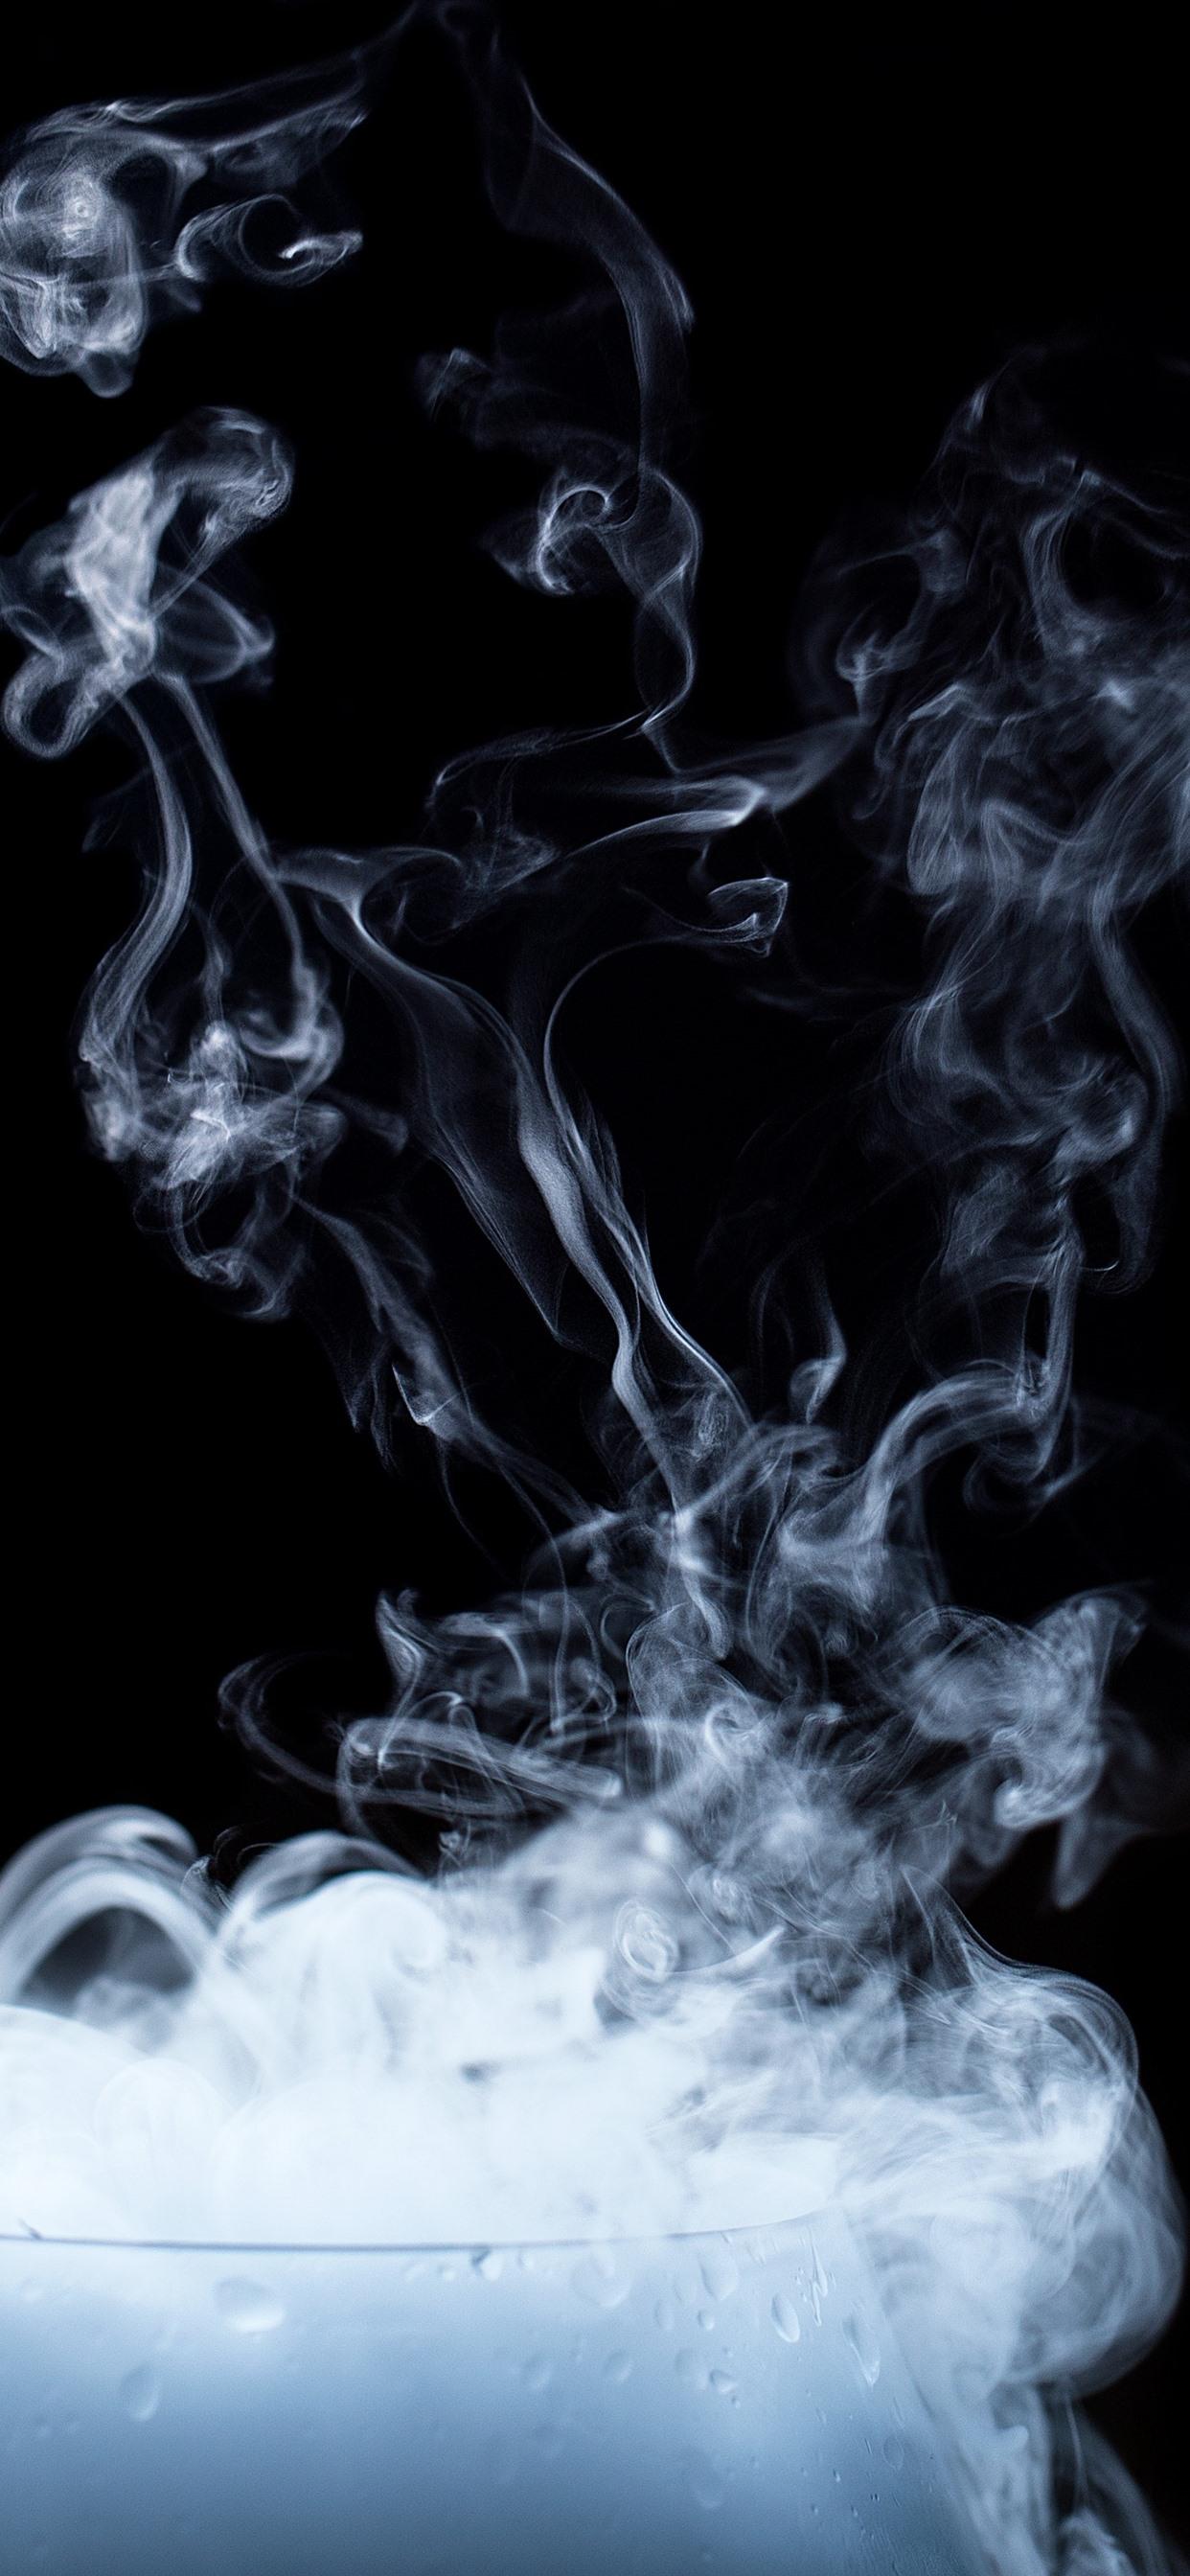 Glass Cup, Smoke, Steam 1242x2688 IPhone 11 Pro XS Max Wallpaper